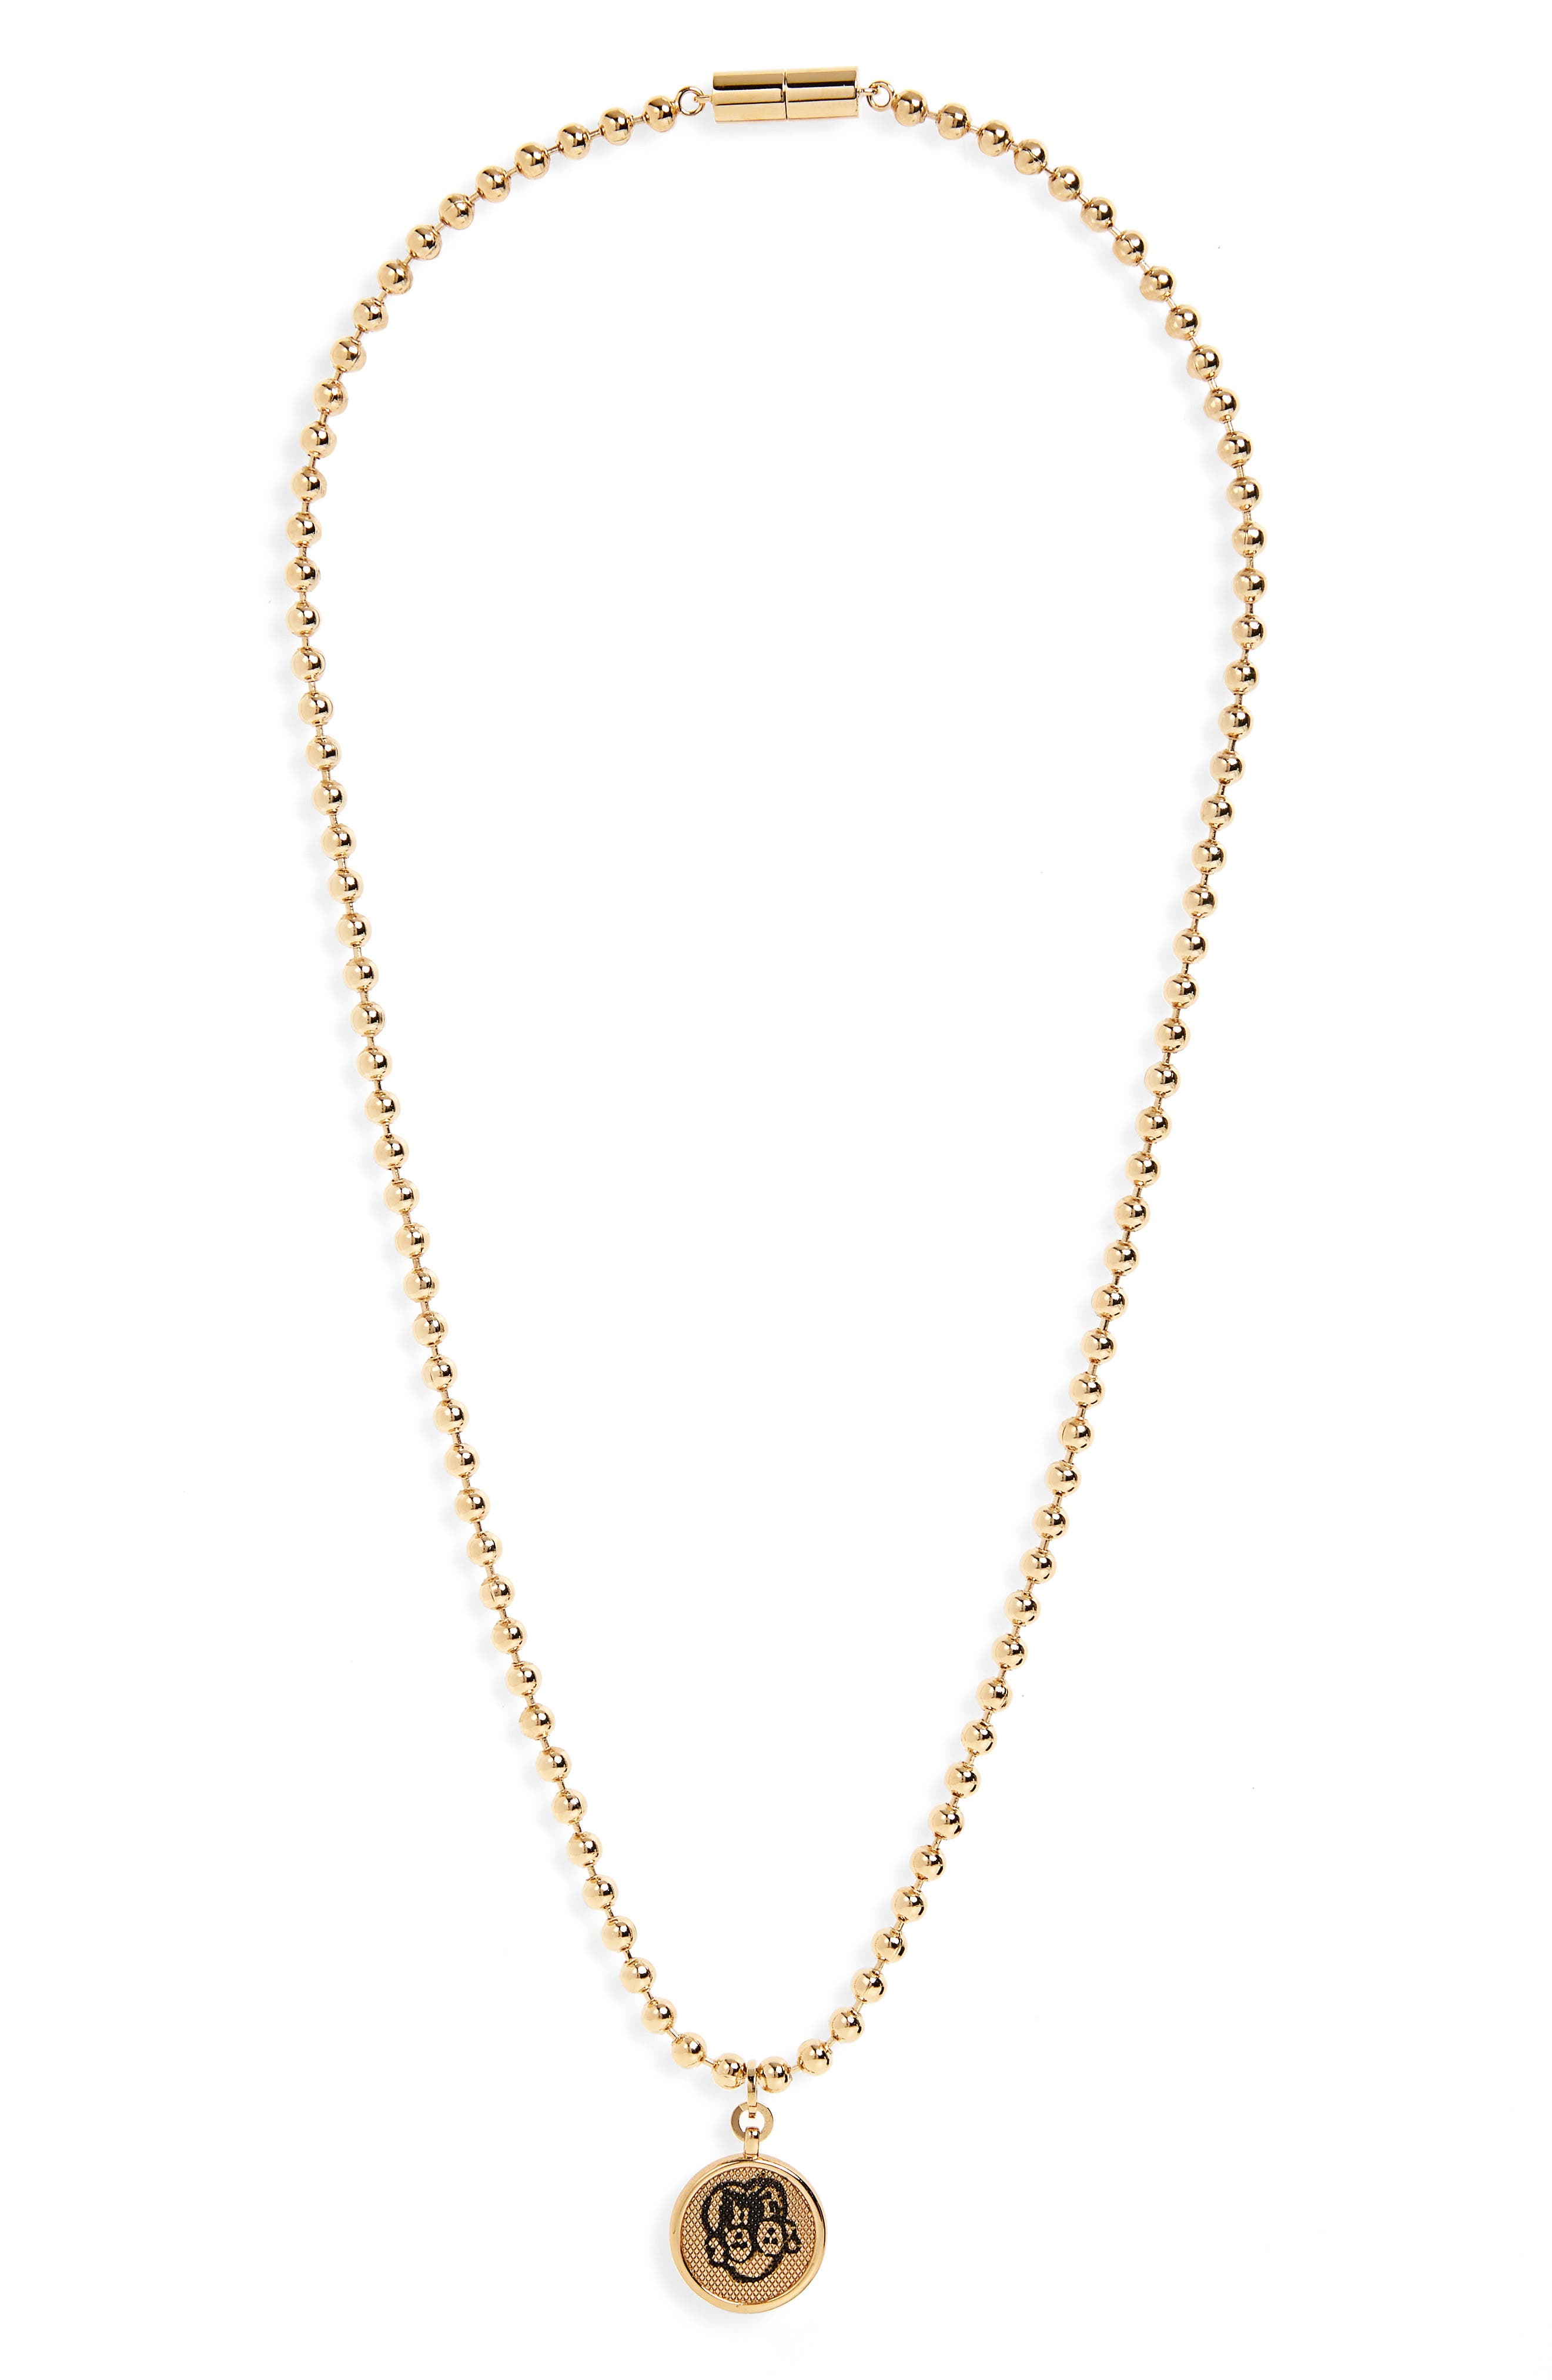 Women's Givenchy Jewelry | Nordstrom